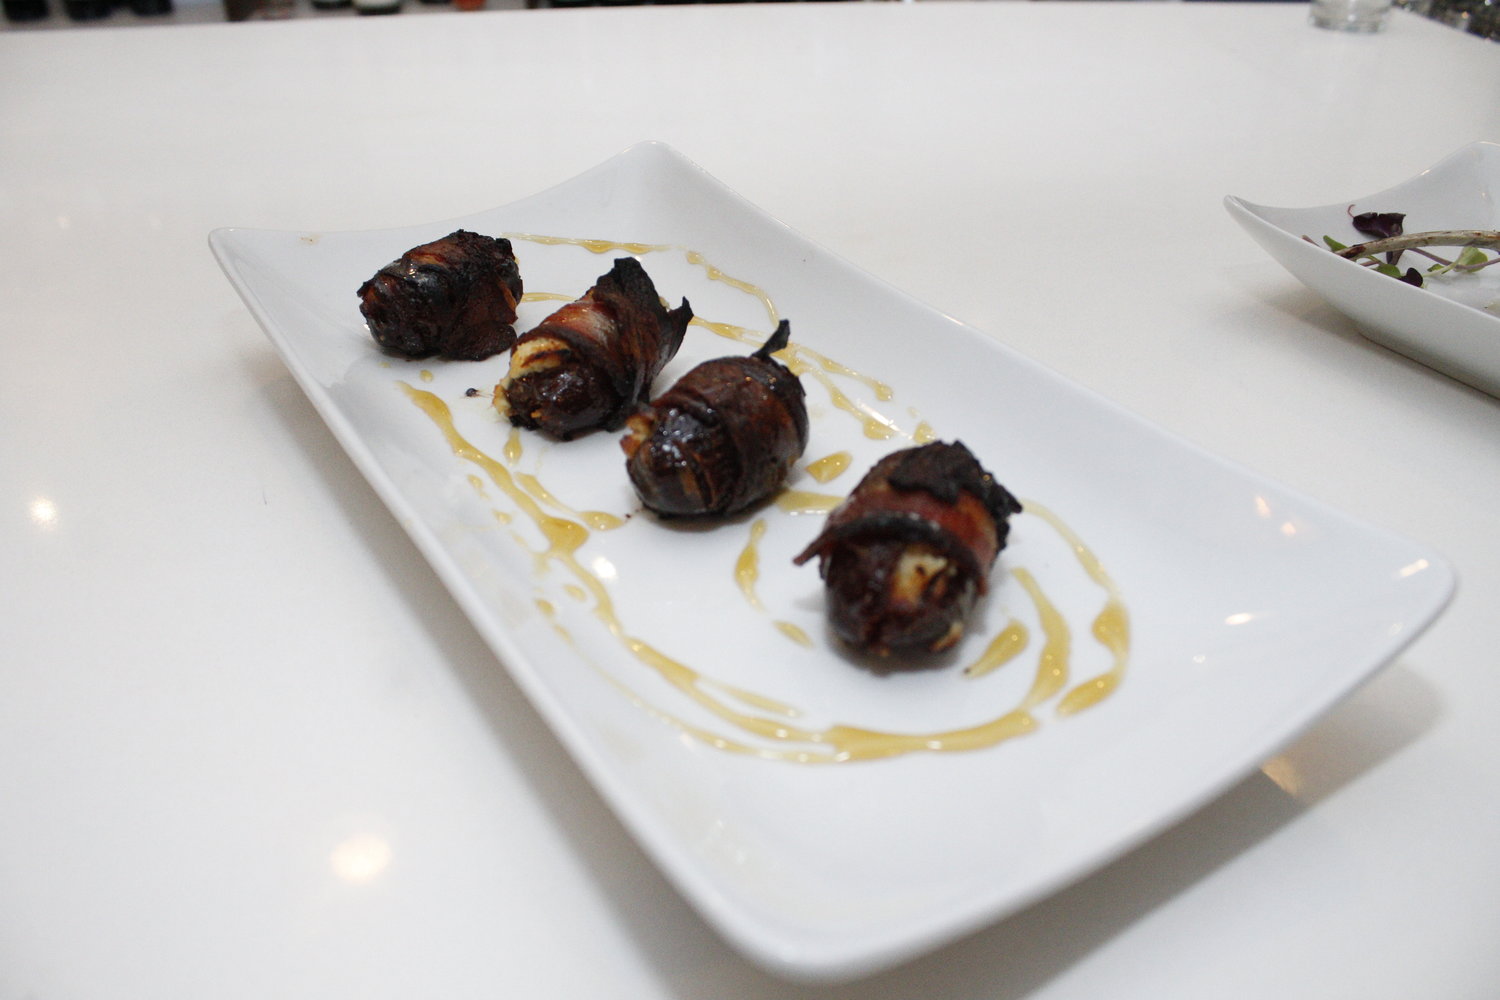 The bacon-wrapped dates stuffed with goat cheese are the perfect savory appetizer.